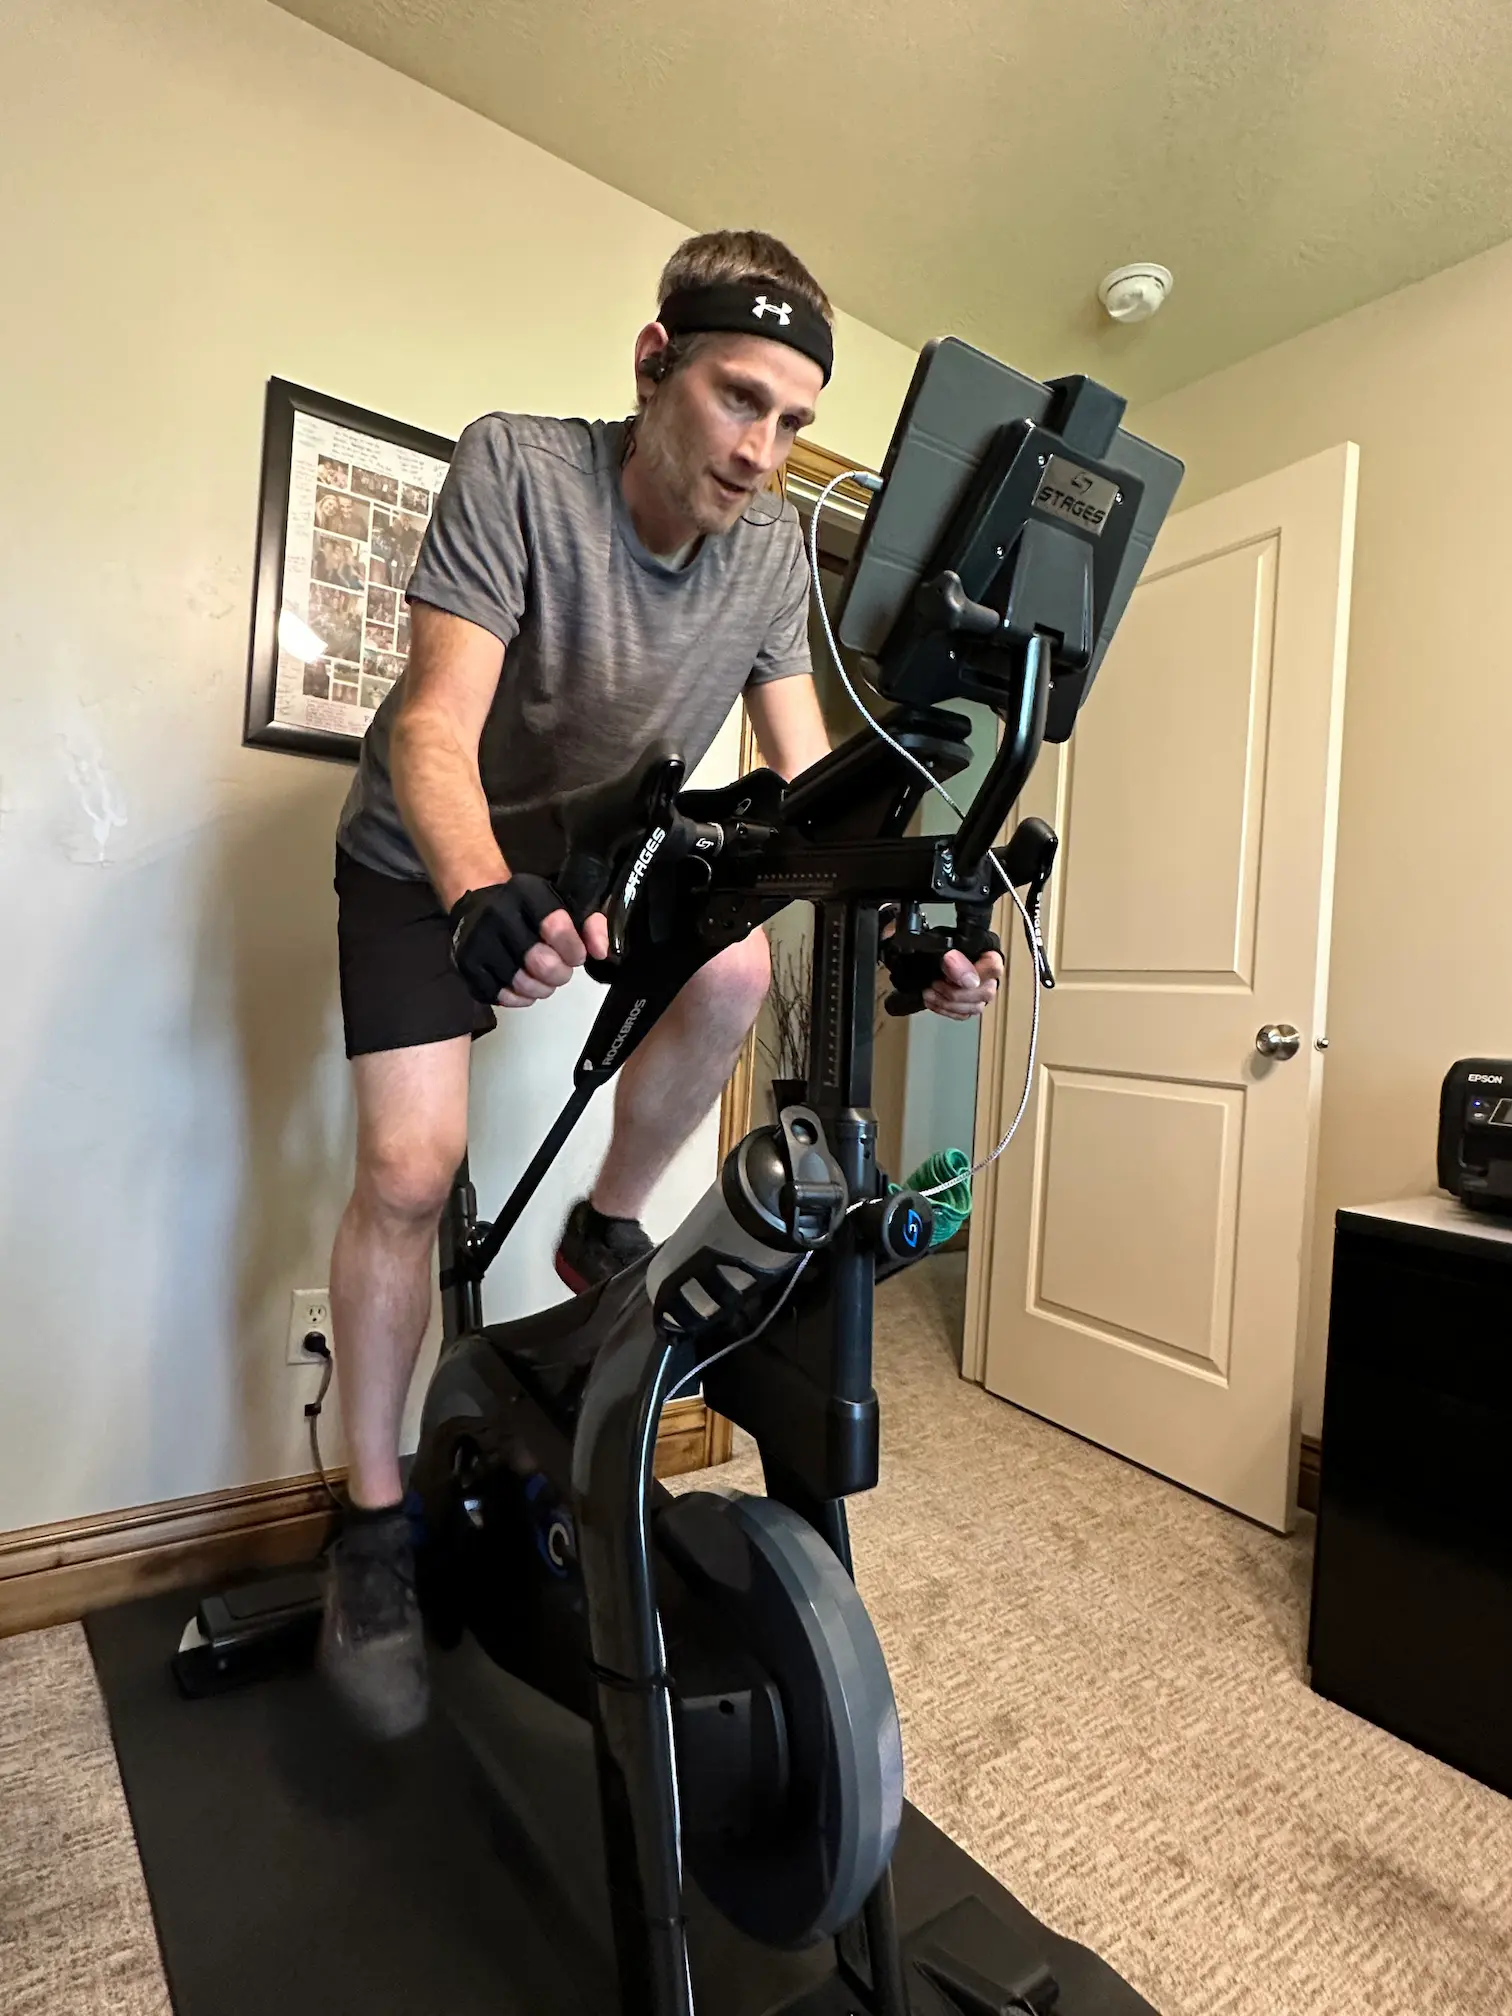 Keith's Pain Cave: Stages SB20 Smart Bike + Zwift Virtual Training